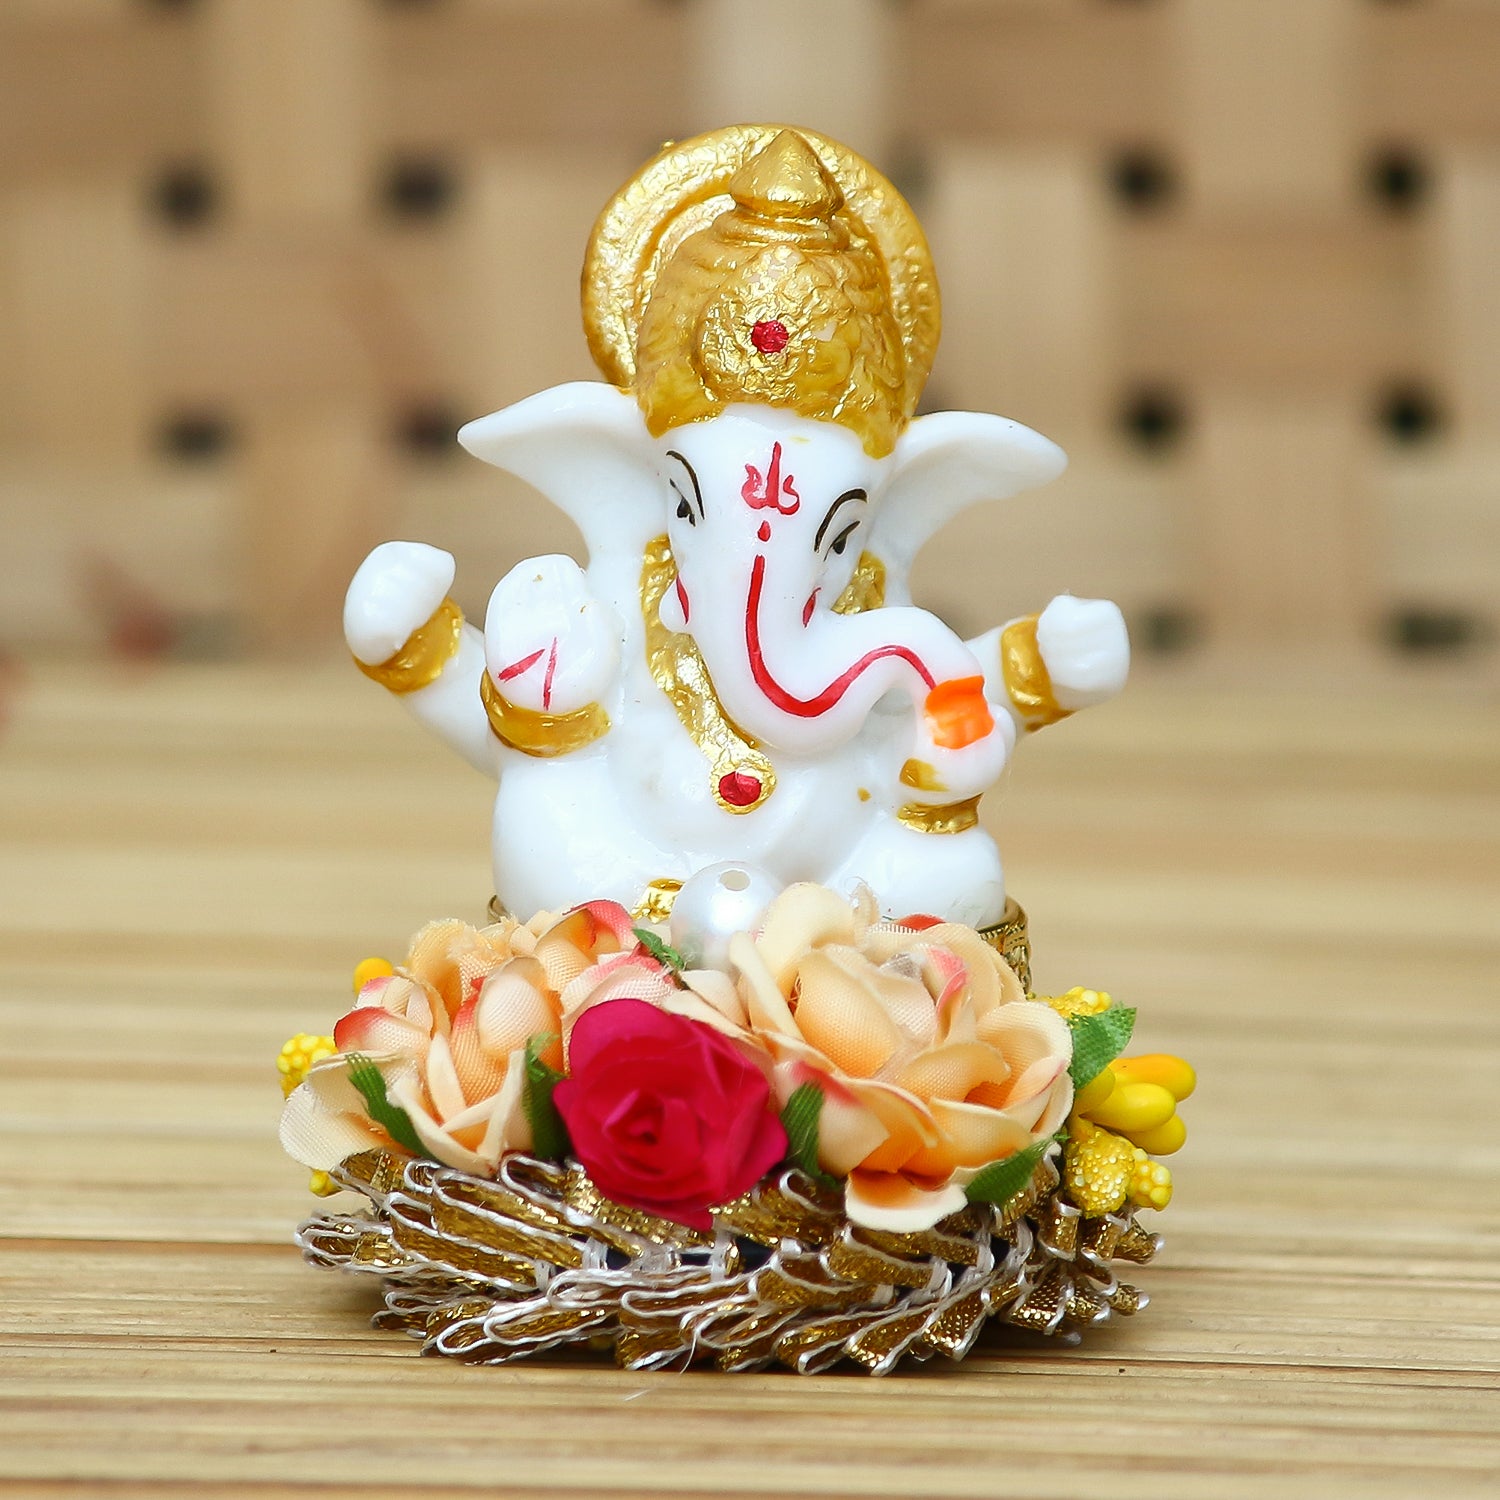 Lord Ganesha Idol On Decorative Handicrafted Plate For Home And Car Dashboard